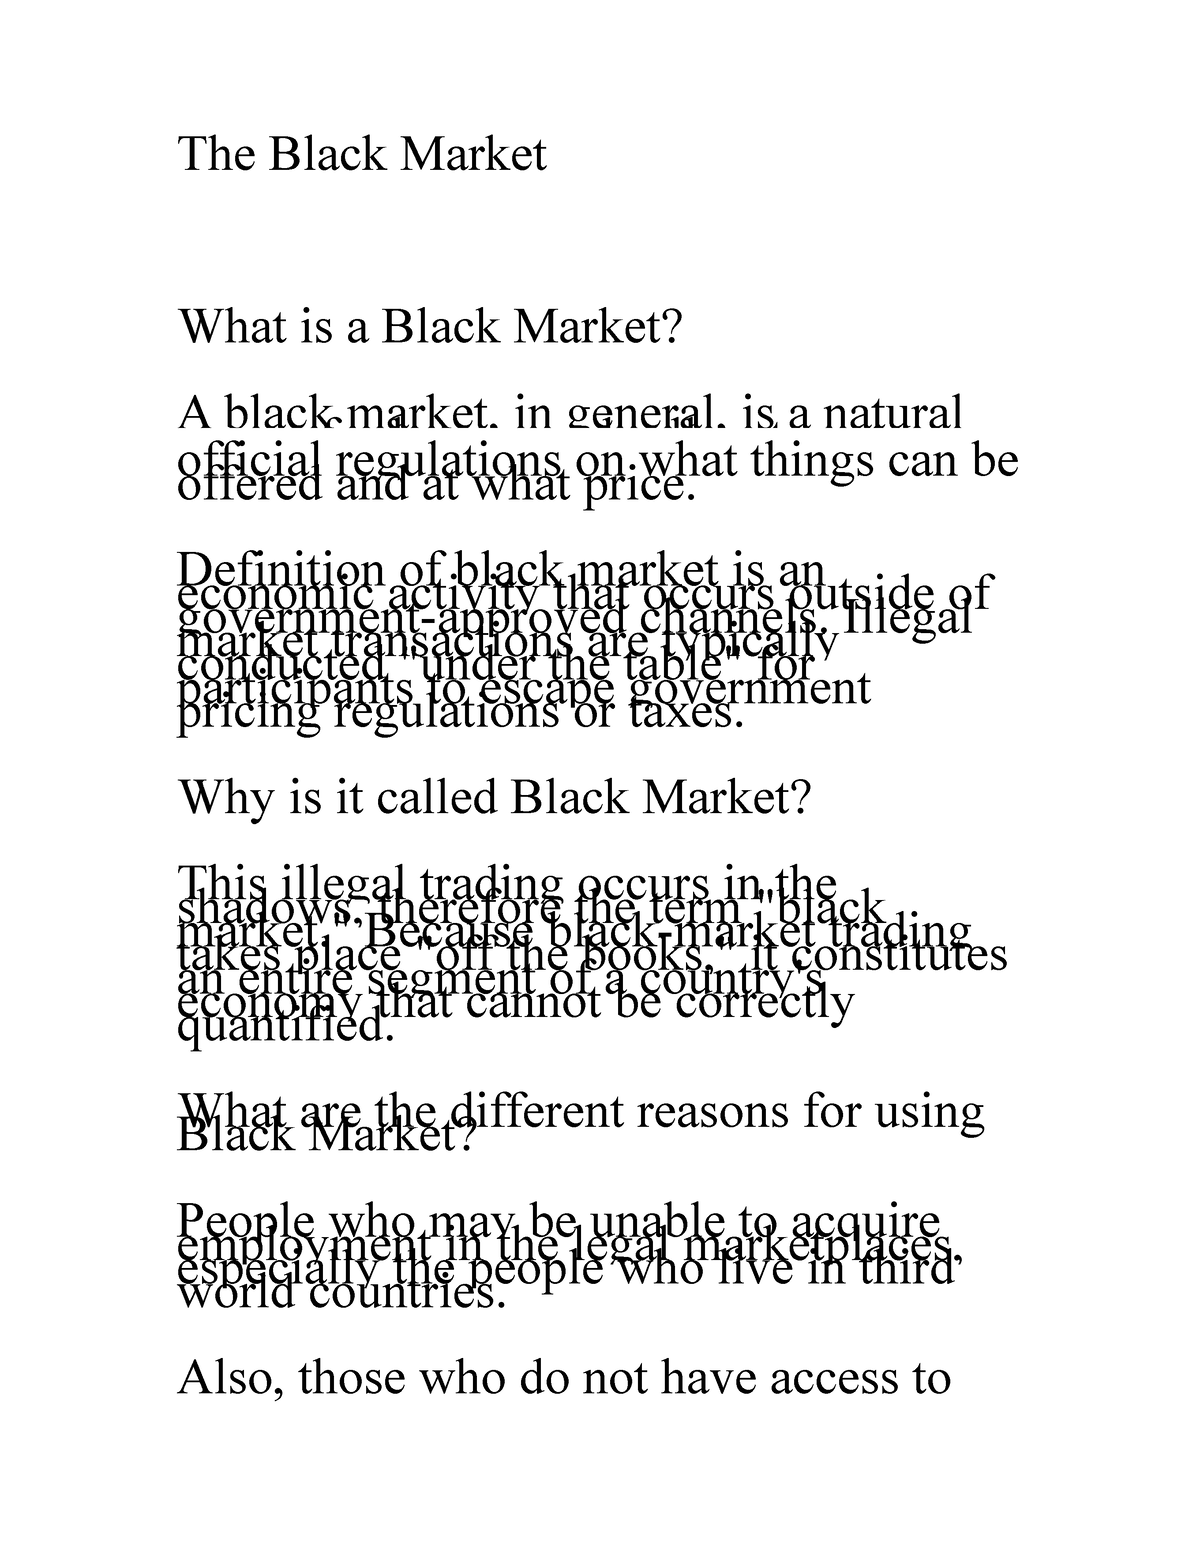 research questions about black market